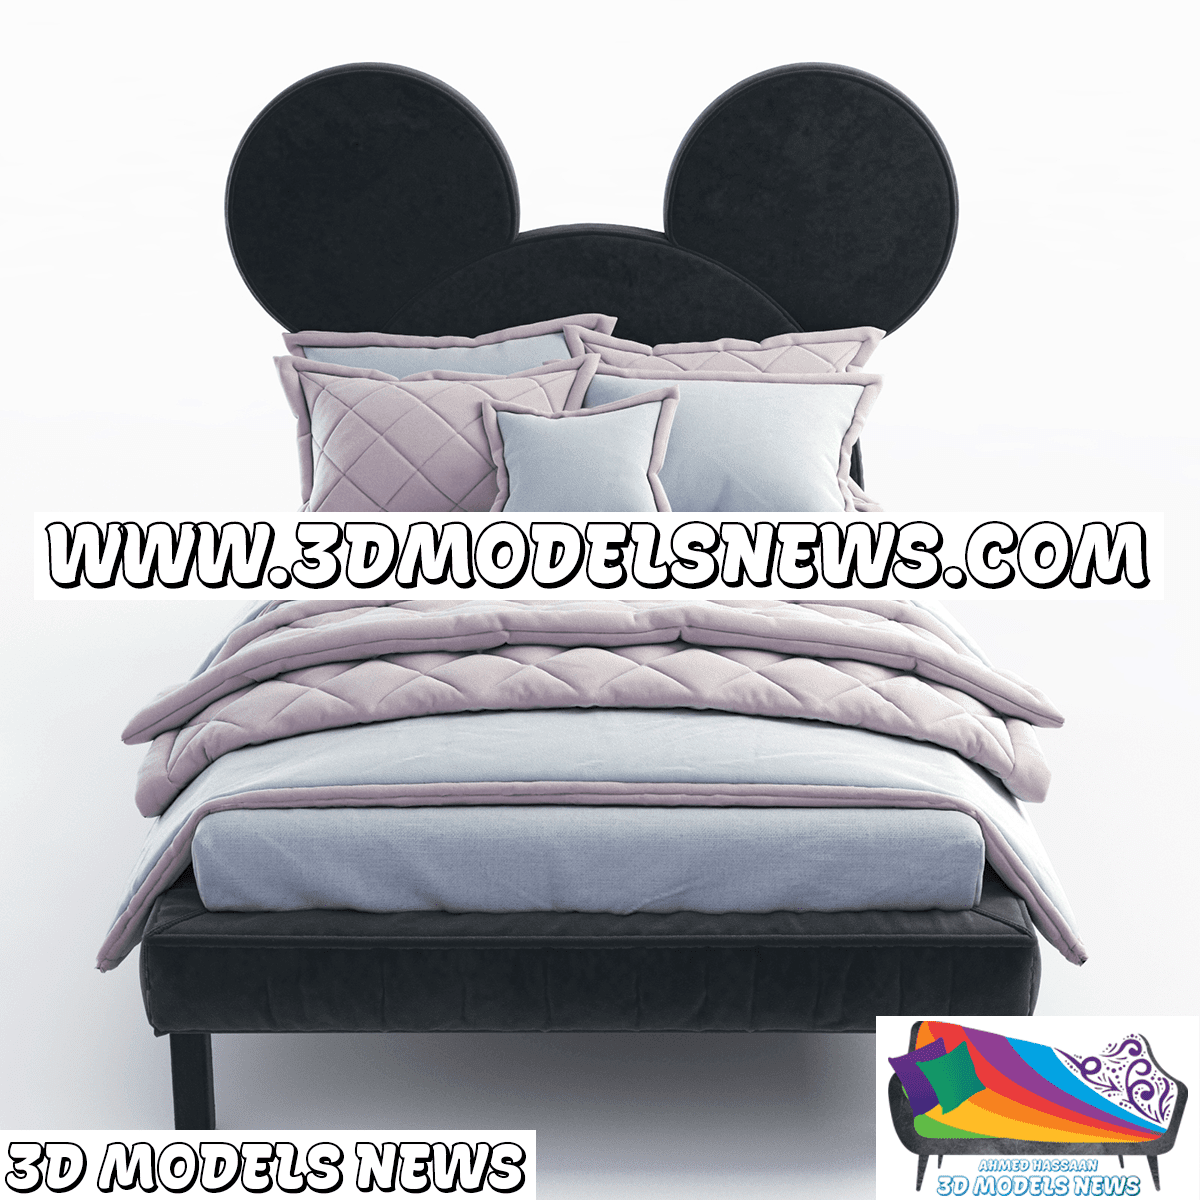 Mickey Mouse bed model for children's rooms modern style 2